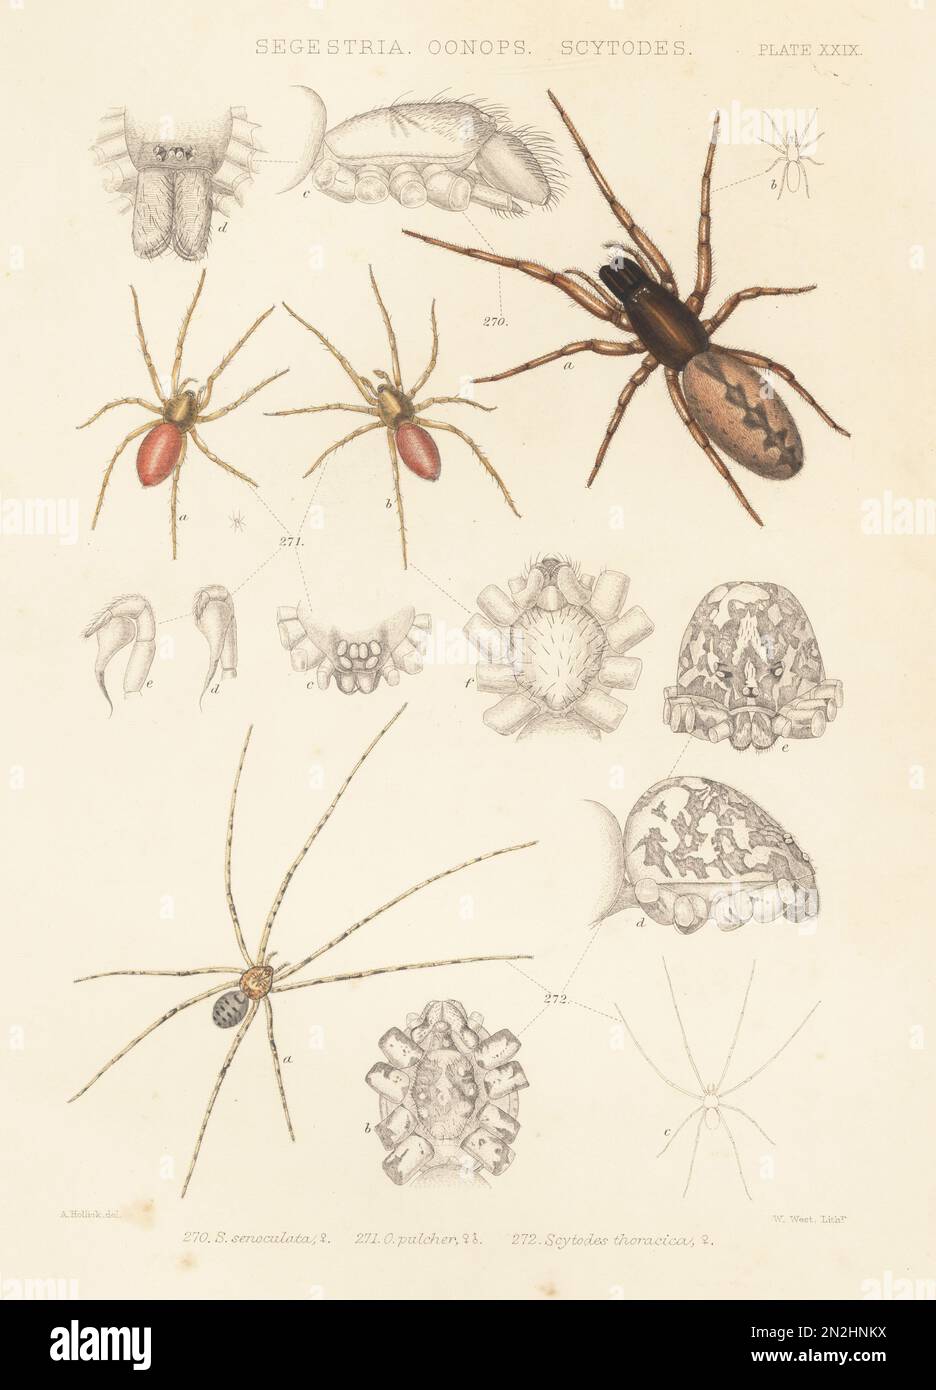 Snake-back spider, Segestria senoculata 270, goblin spider, Oonops pulcher 271, and spitting spider, Scytodes thoracica 272. Handcoloured lithograph by W. West after Alfred Hollick from John Blackwall’s A History of the Spiders of Great Britain and Ireland, Ray Society, London, 1861. Stock Photo